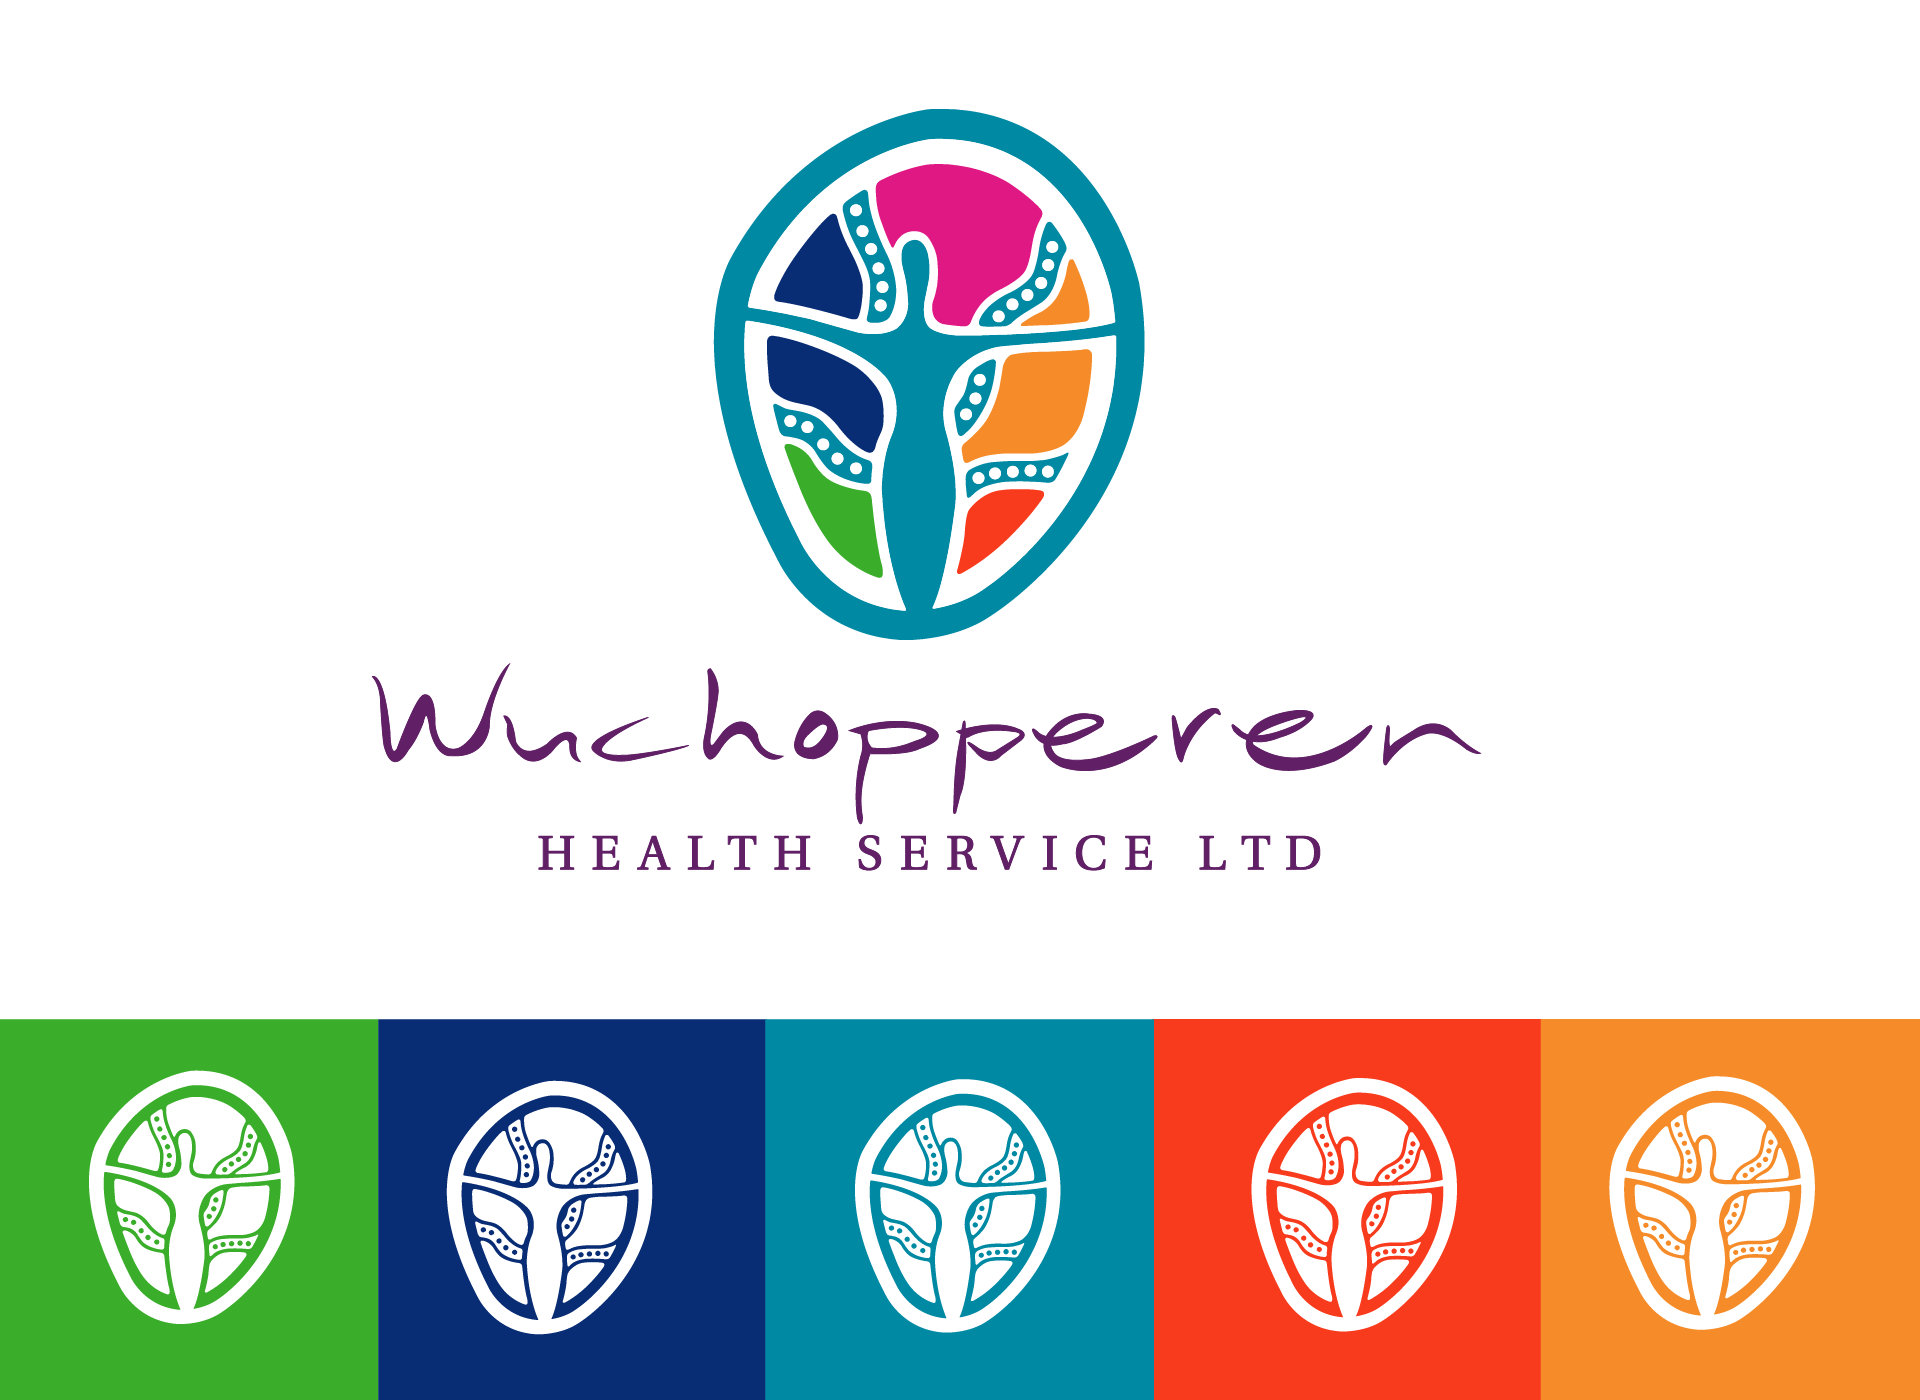 First Nations creative design for Indigenous health icon Wuchopperen Health Service